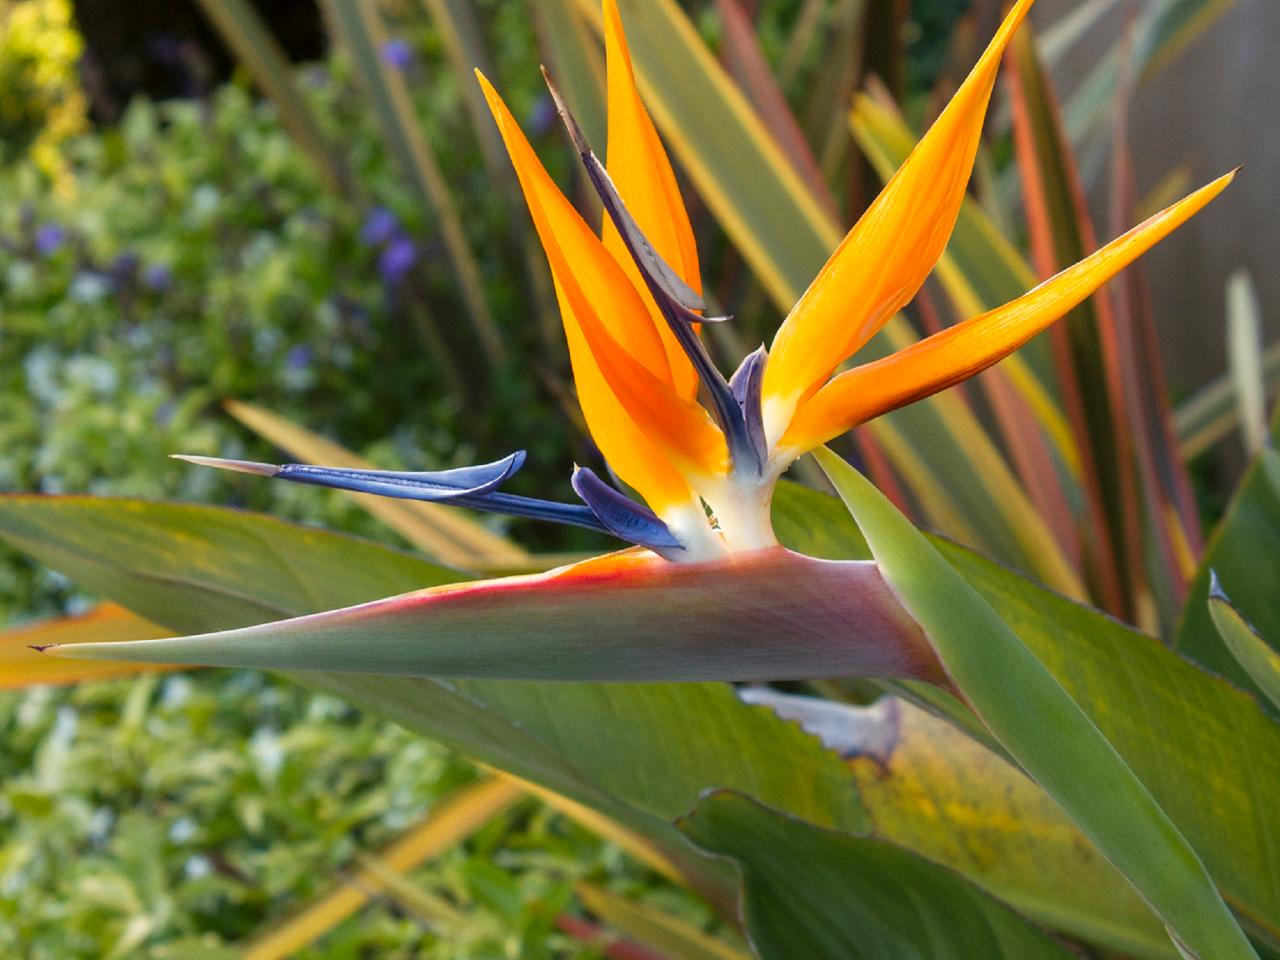 How to get more flowers in Bird of Paradise?